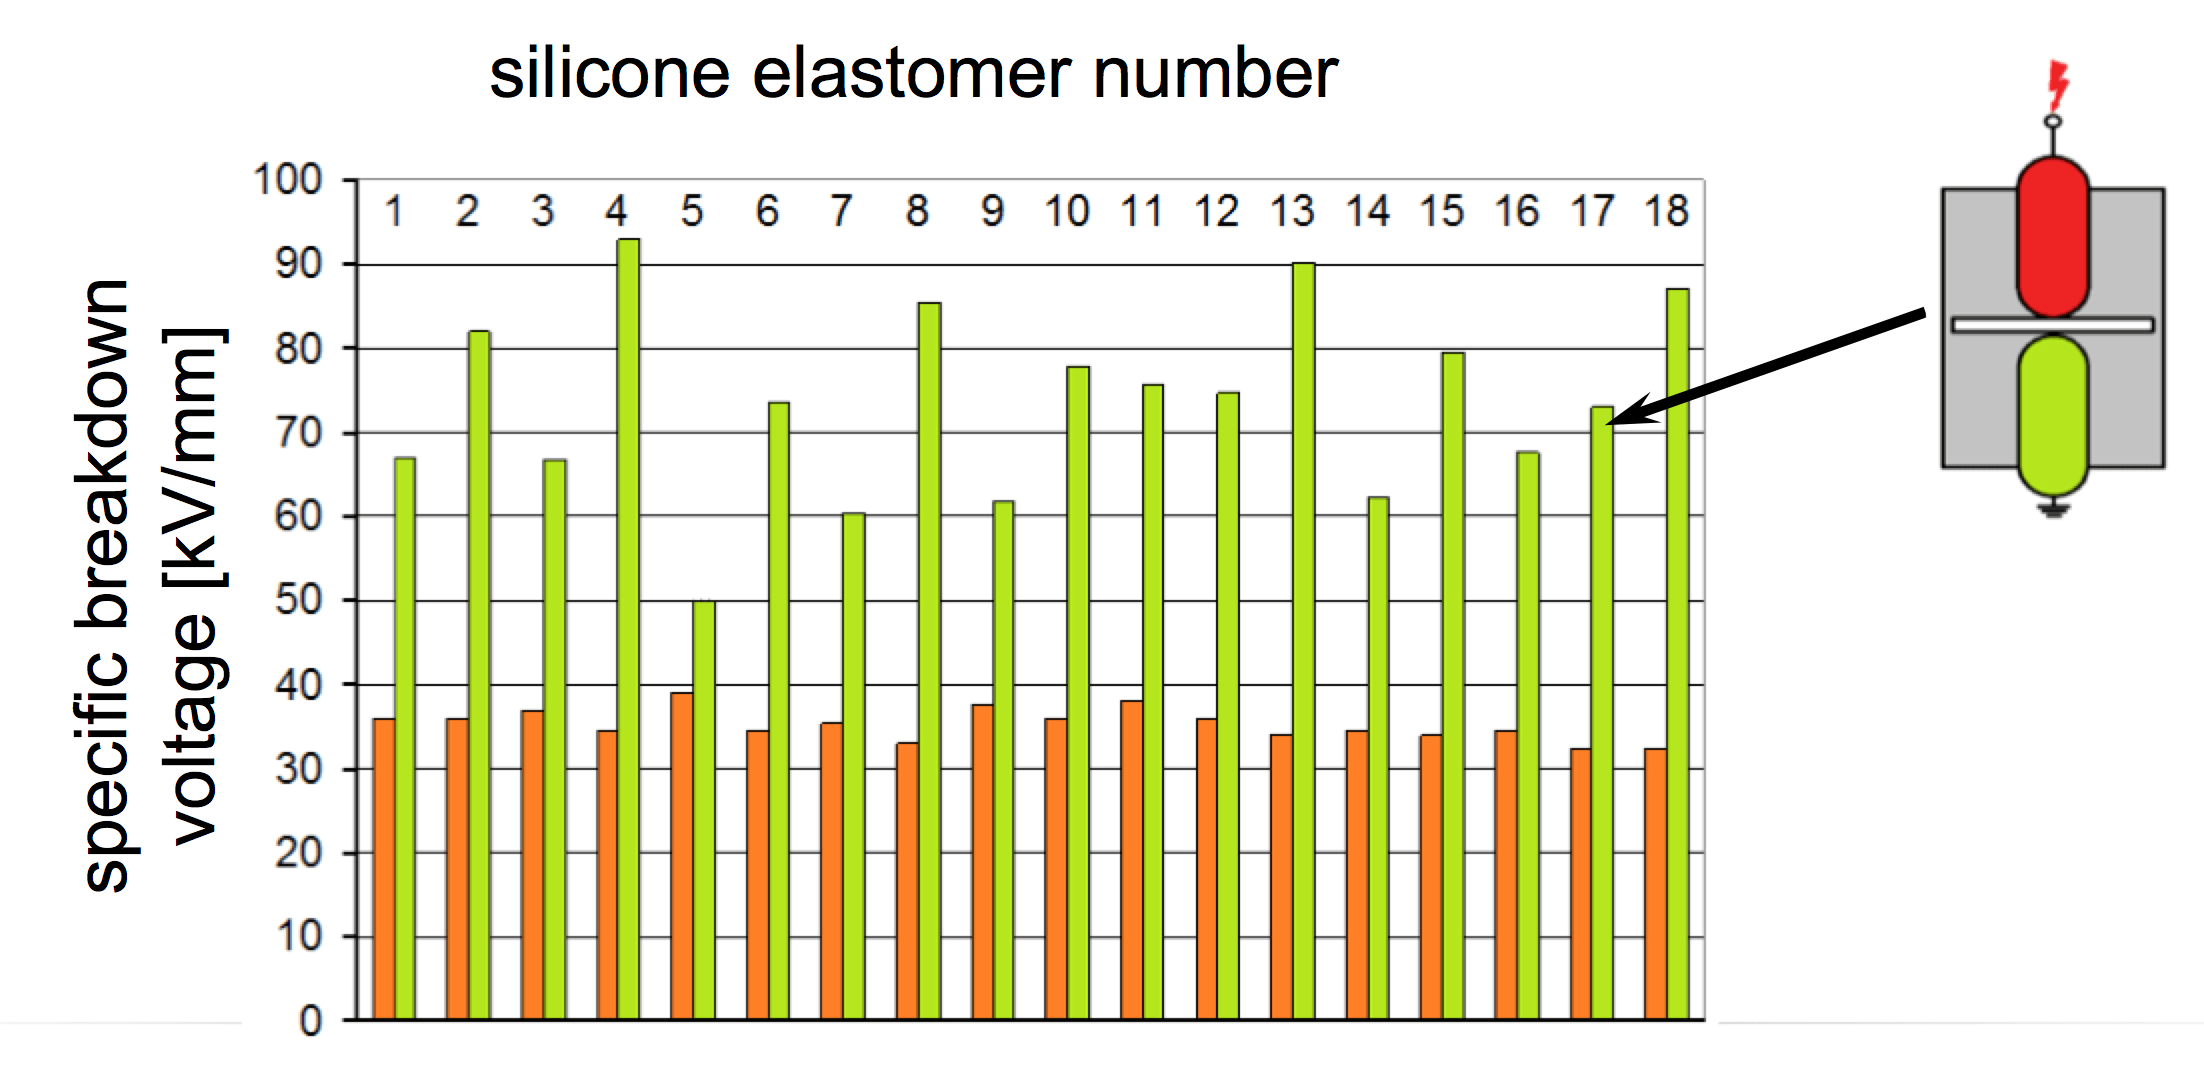 Fig. 16: Specific breakdown voltage of 18 different silicone elastomers measured with ball-plate arrangement (orange bars) and embedded ball-ball electrodes (green bars). 